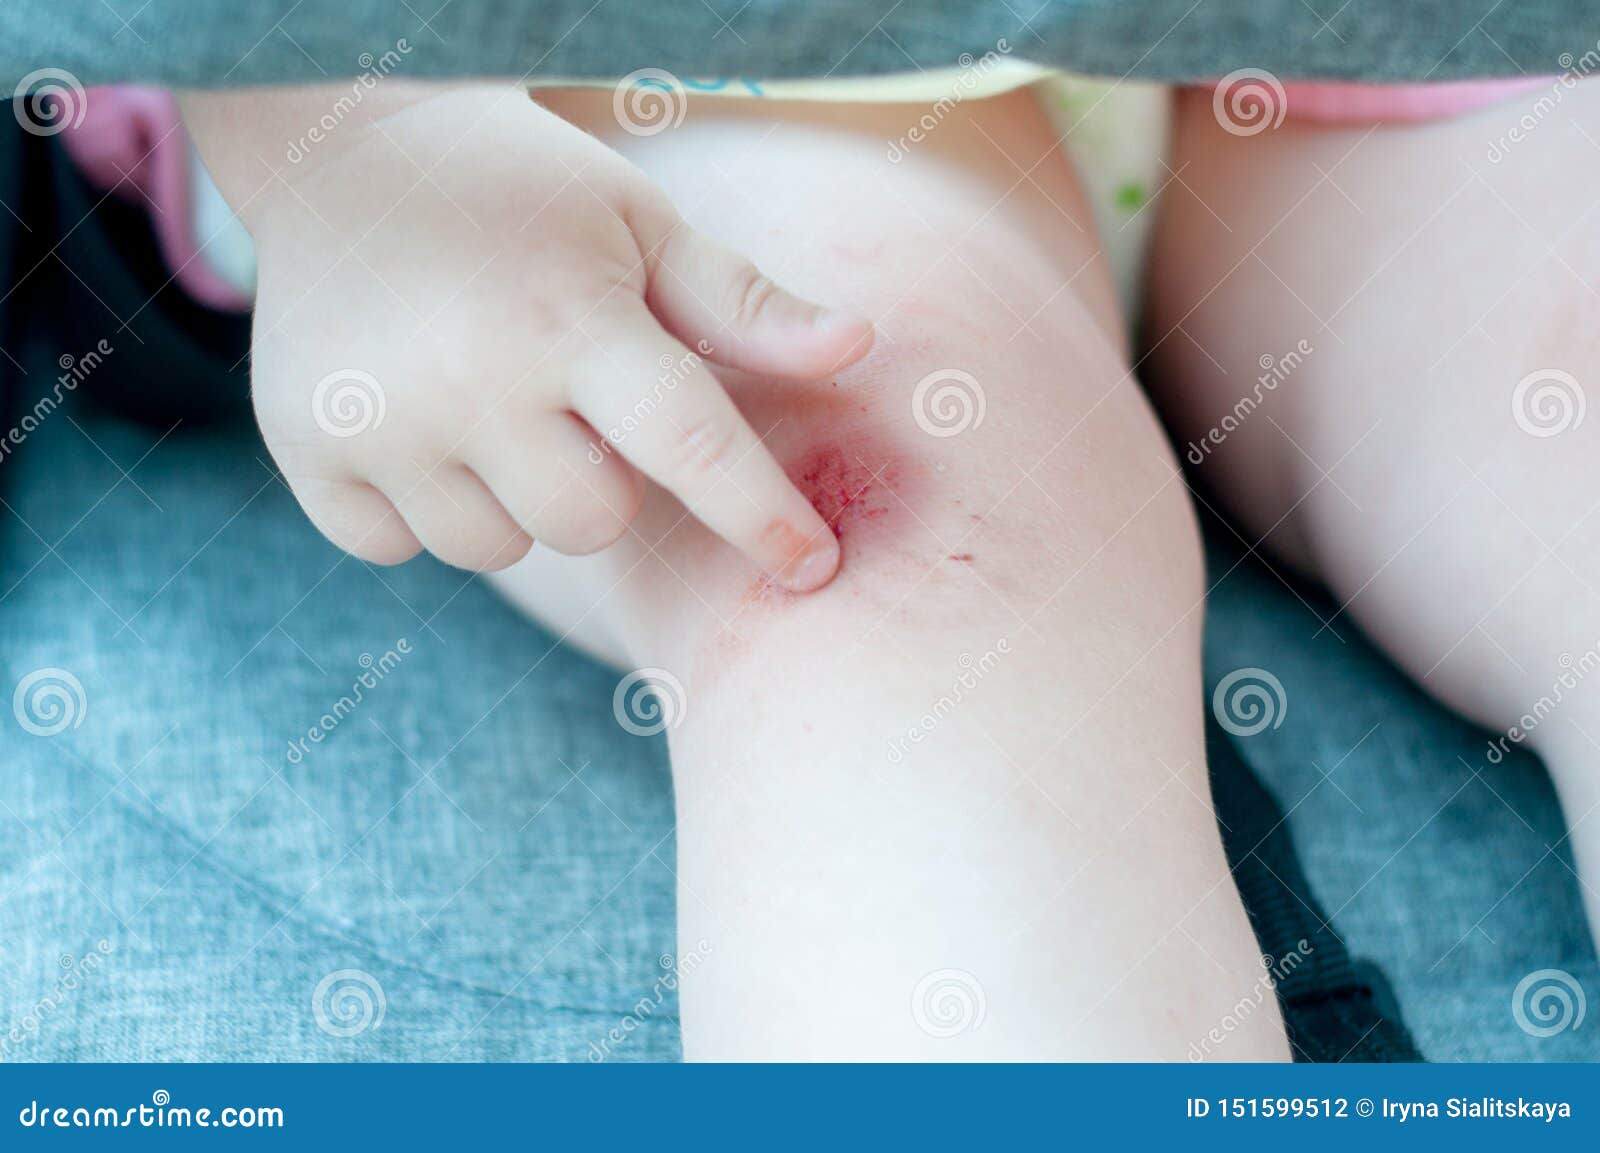 Blur Image Of Fresh Wound On Knee Fresh Bruise Knee Wound Injury With